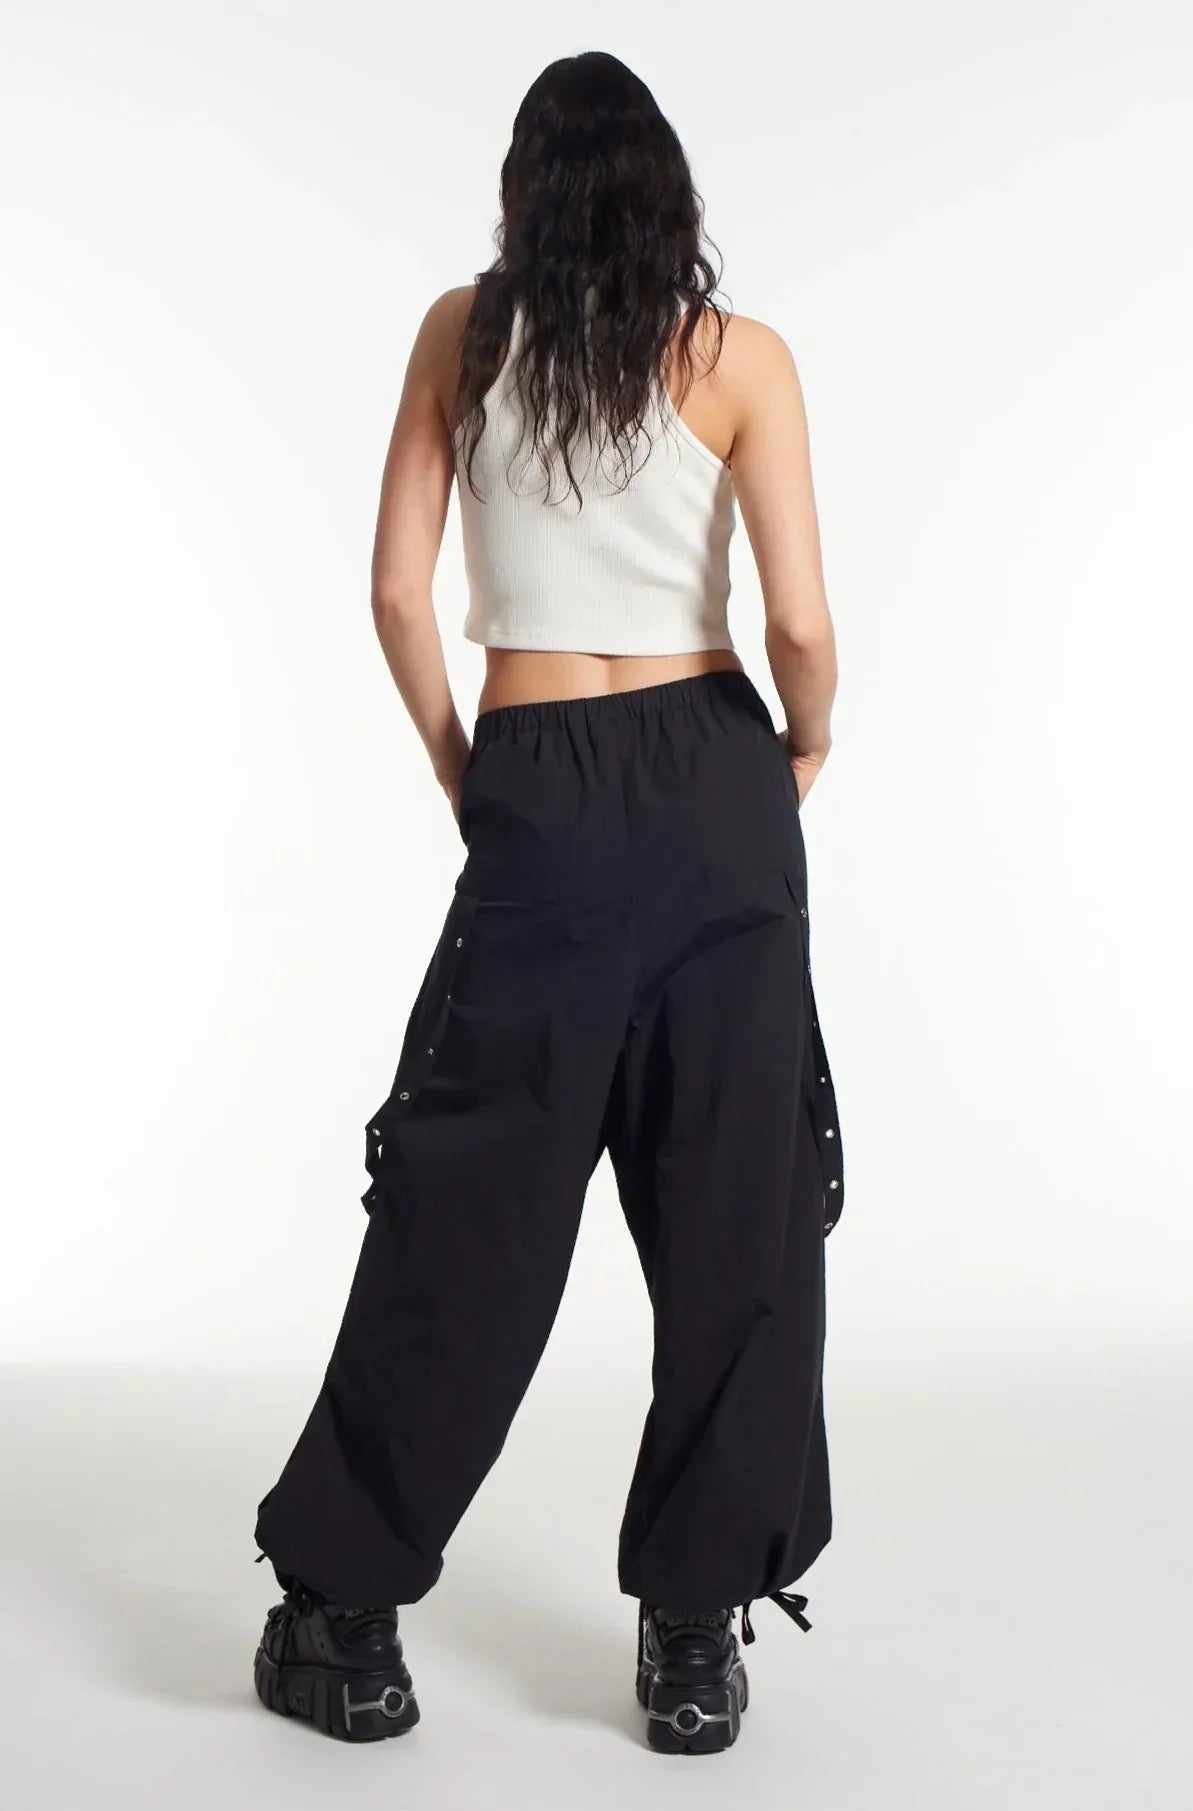 NOMAD PARACHUTE PANTS - EXCLUSIVE Pants from THE RAGGED PRIEST - Just €63! SHOP NOW AT IAMINHATELOVE BOTH IN STORE FOR CYPRUS AND ONLINE WORLDWIDE @ IAMINHATELOVE.COM